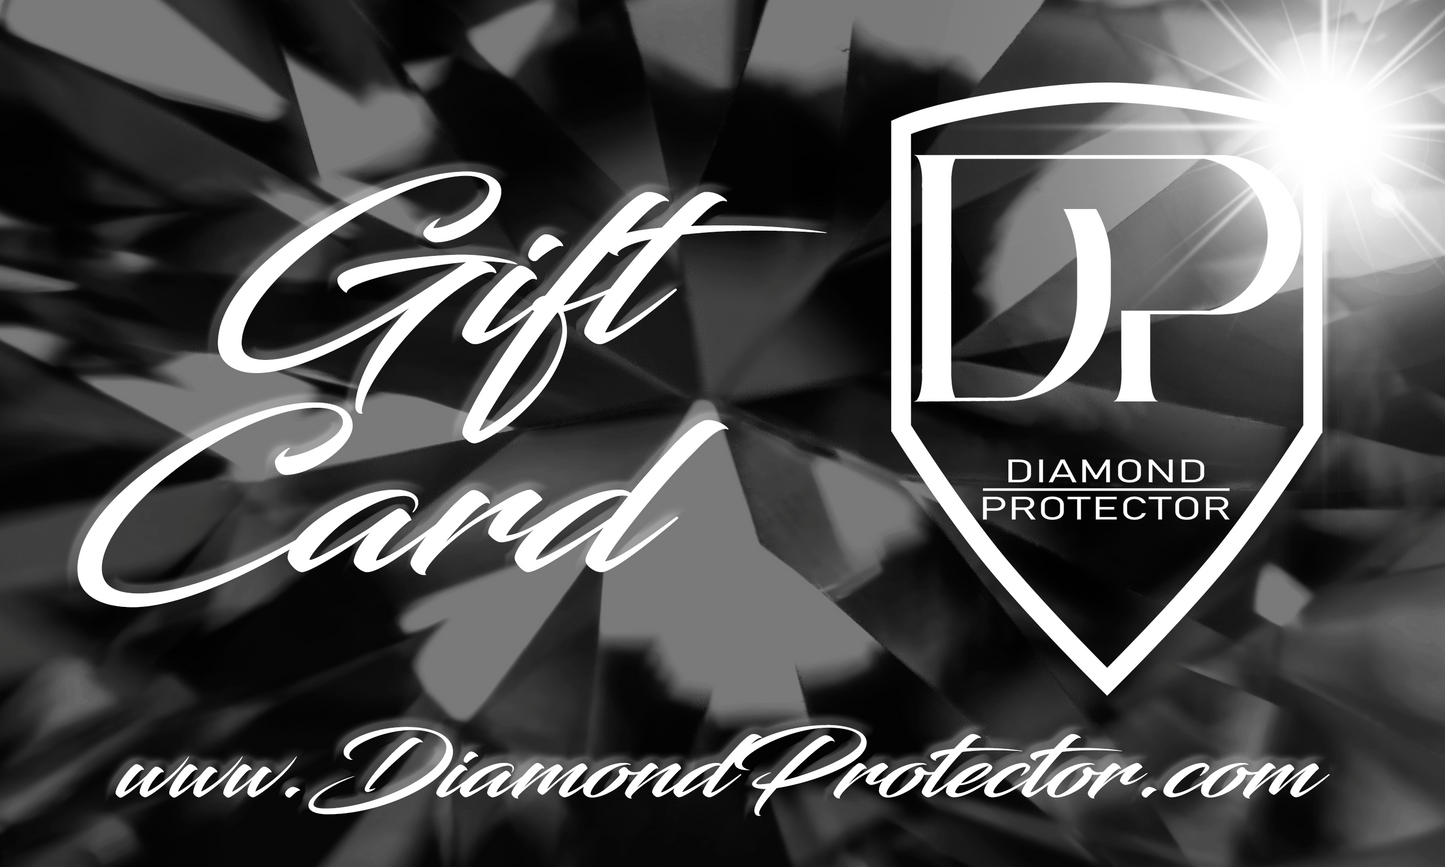 Gift Card - Premium  from Diamond Protector - Shop now at Diamond Protector